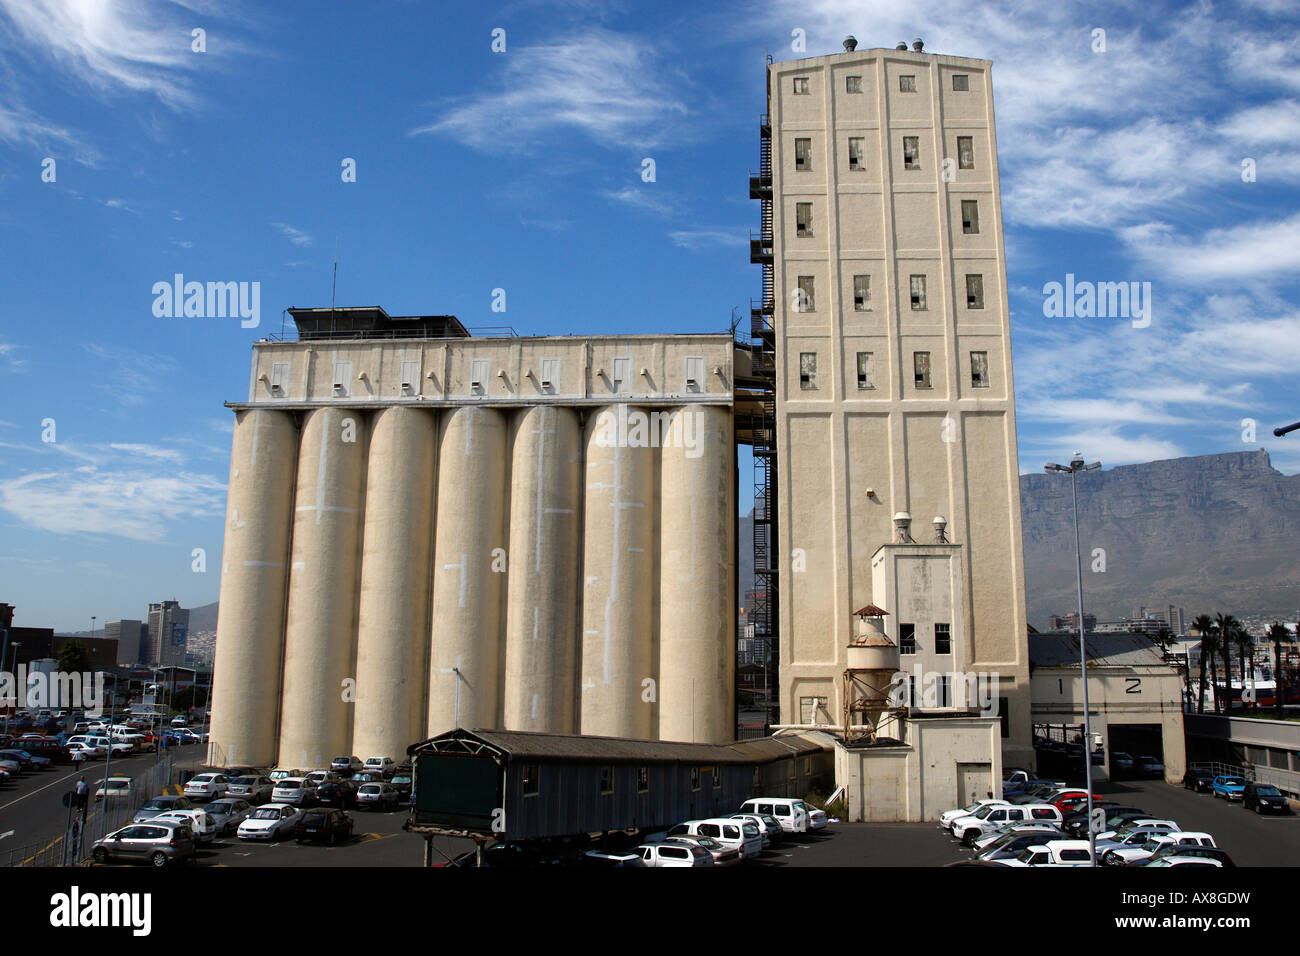 grain silos on fish quay road v&a waterfront cape town western cape province south africa Stock Photo